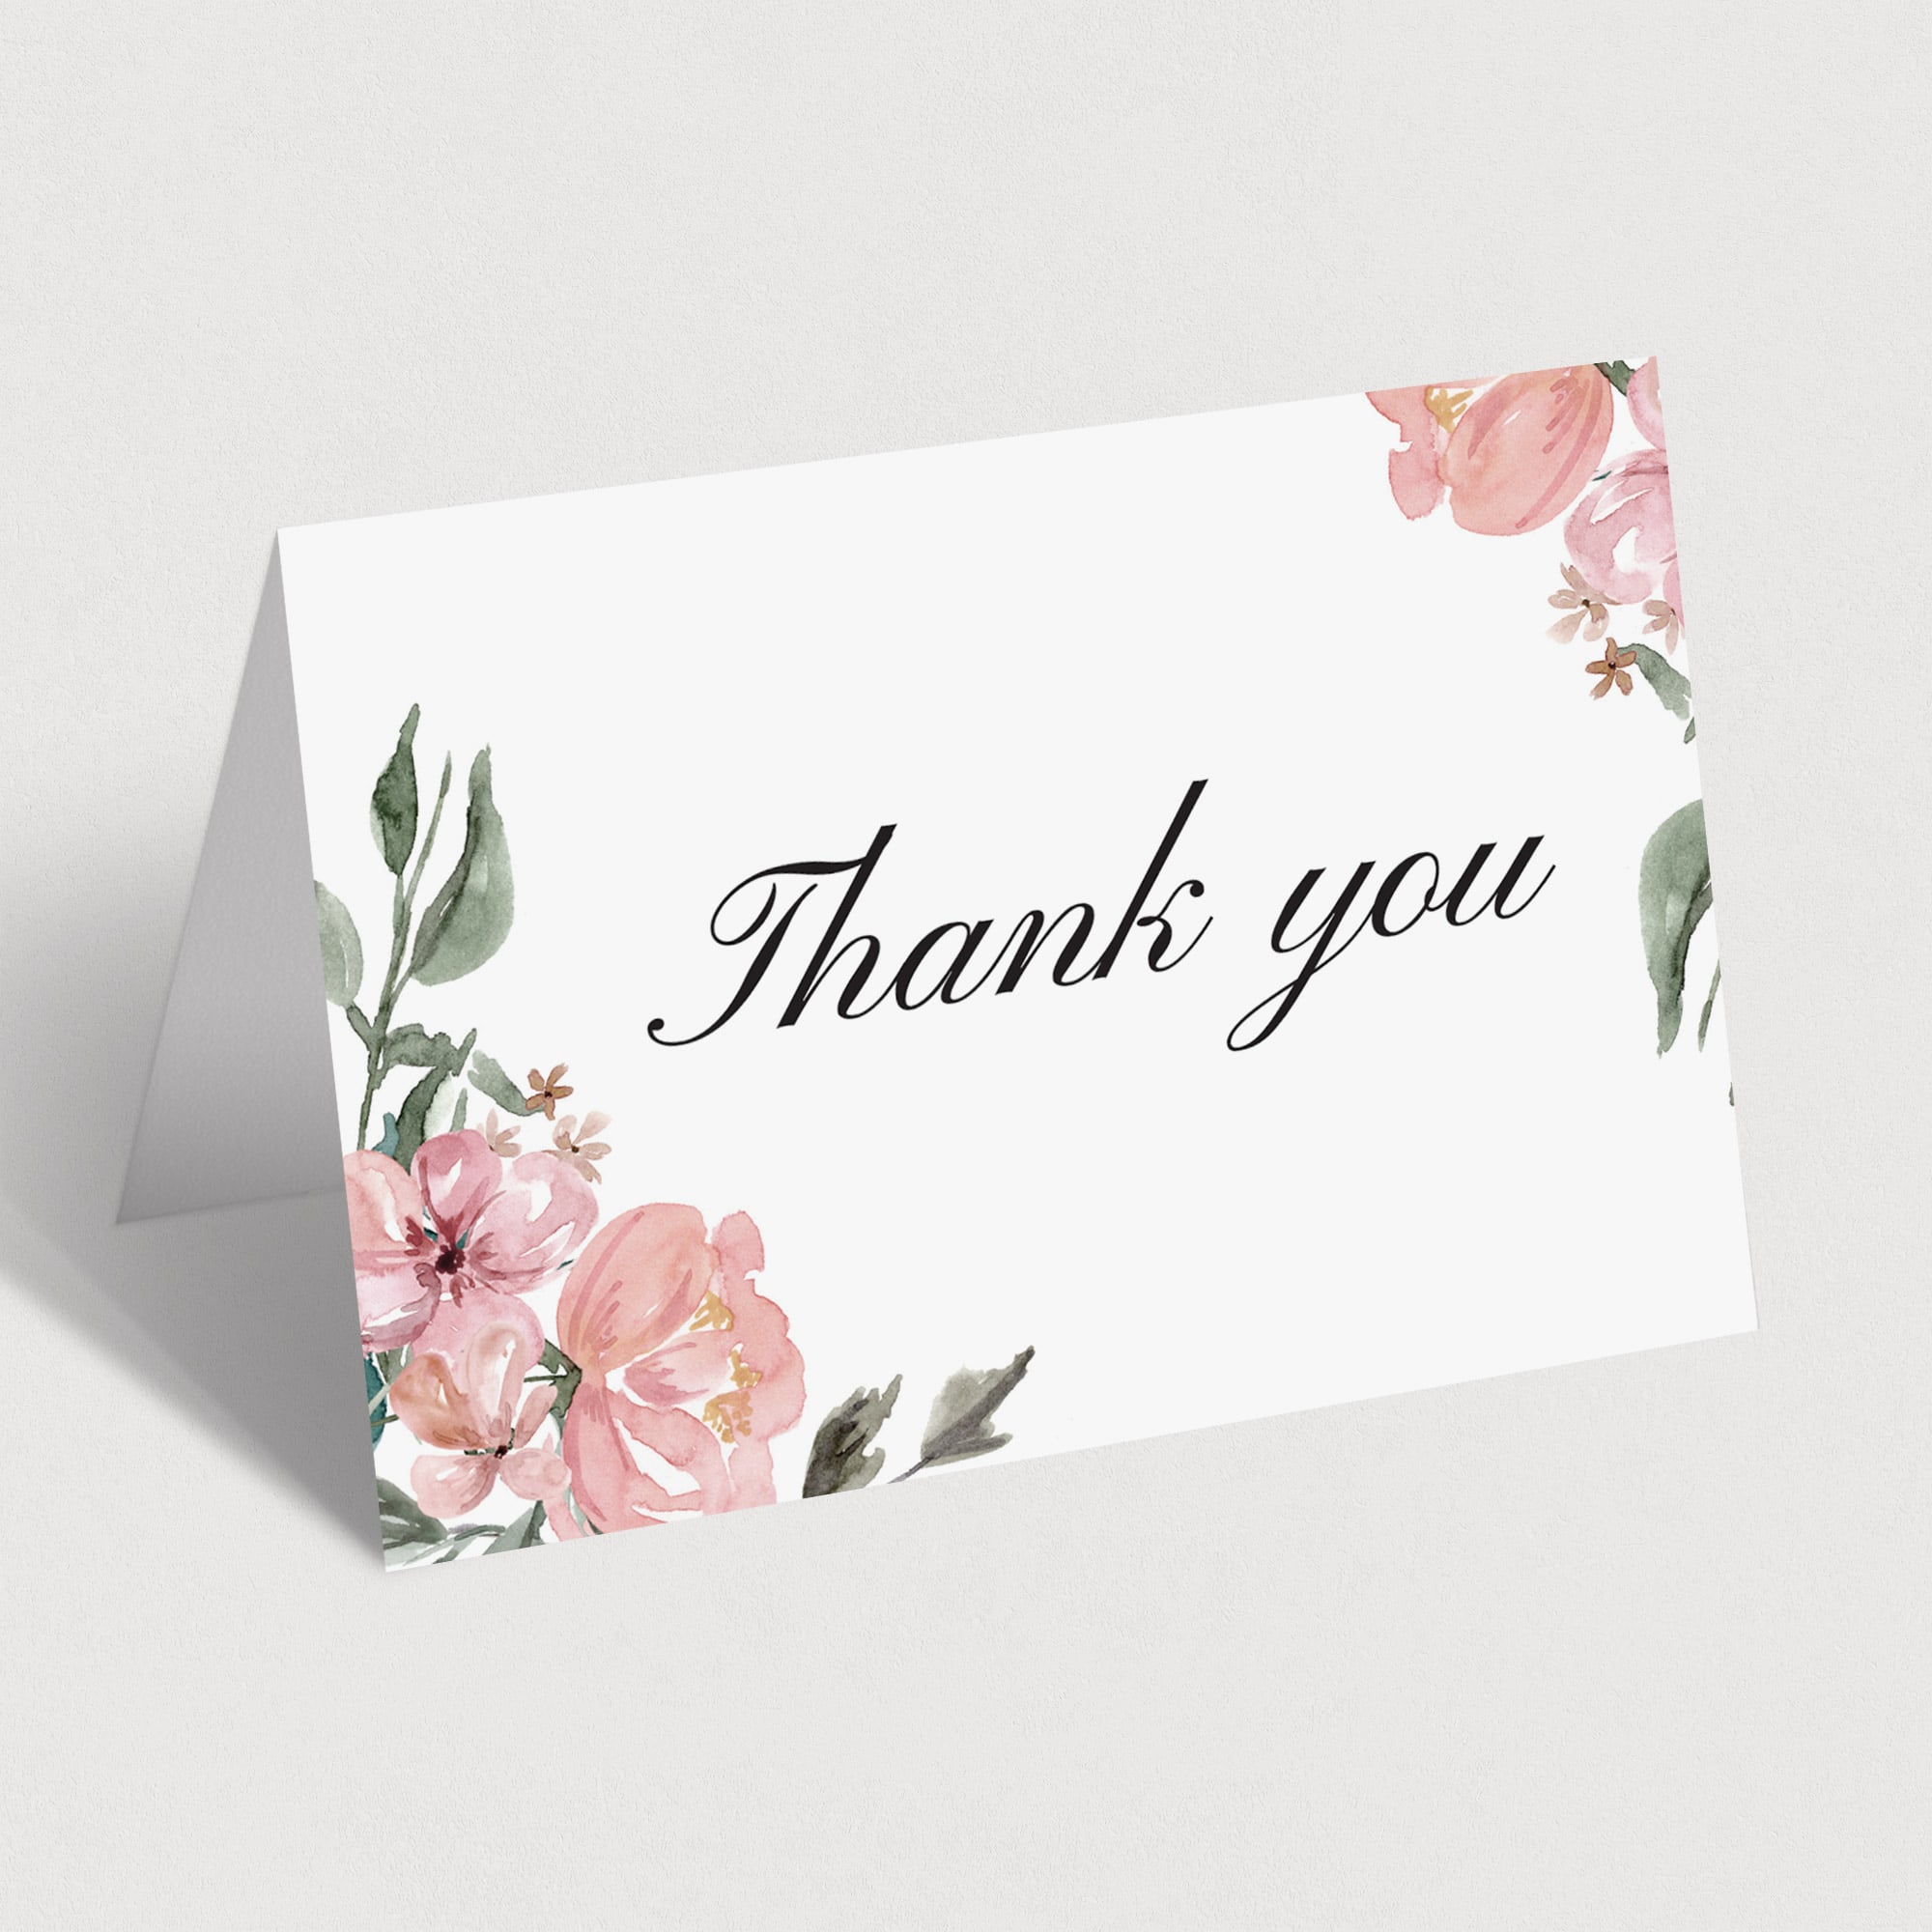 Thank you card for whimsical shower by LittleSizzle